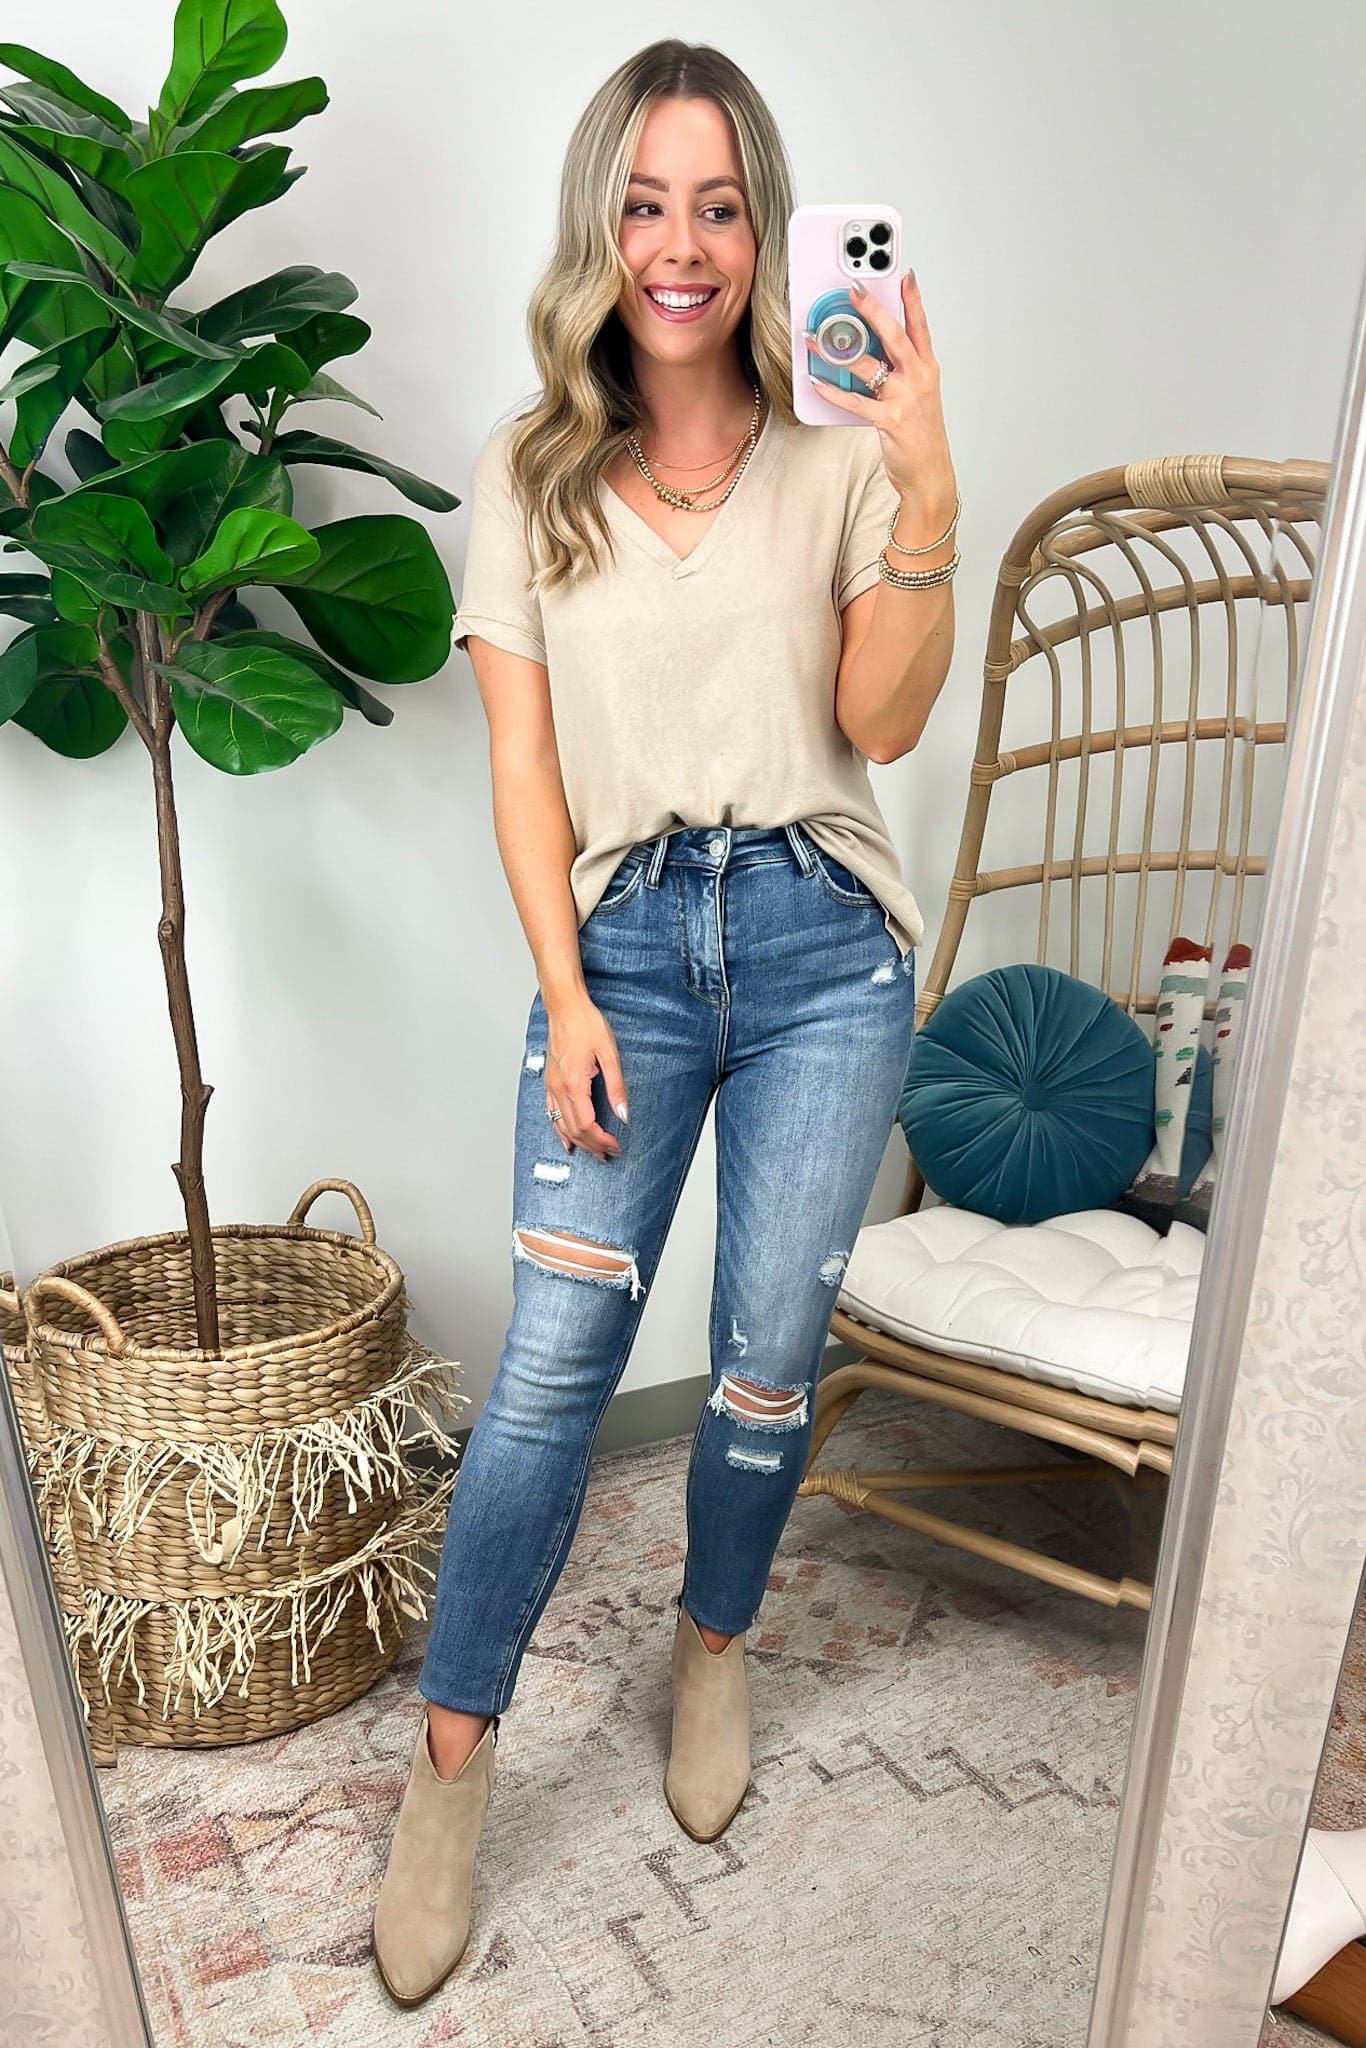  Kayelle Short Sleeve V-Neck Top - FINAL SALE - Madison and Mallory